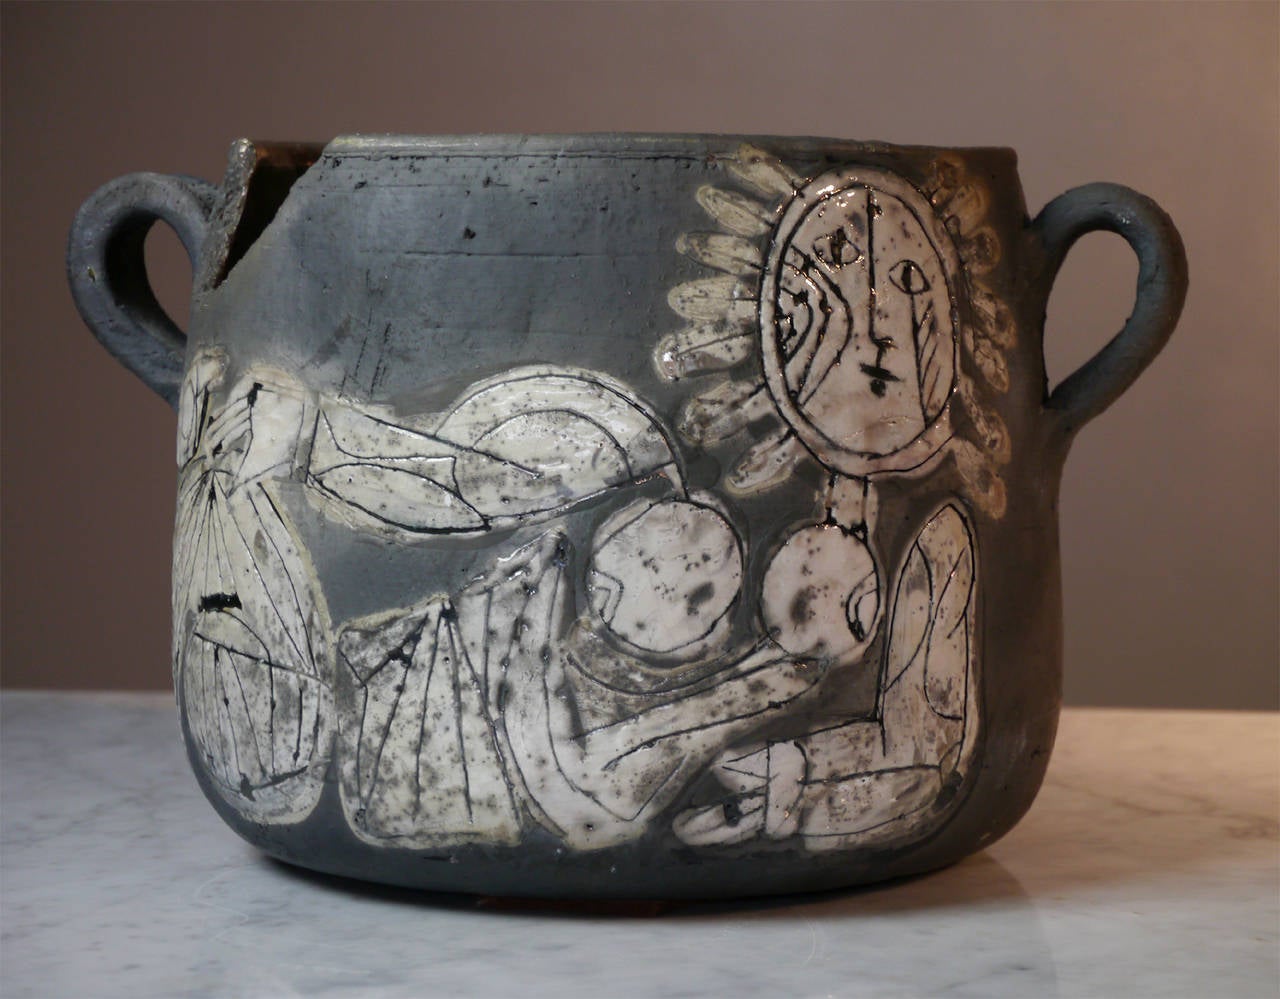 A tribute to the Folk Art by Roger Capron.

A wonderfully executed motive on an old and traditional cooking pot, called "pignate," in south of France.

This very particular work was executed for an exhibition in Vallauris in 1997, only